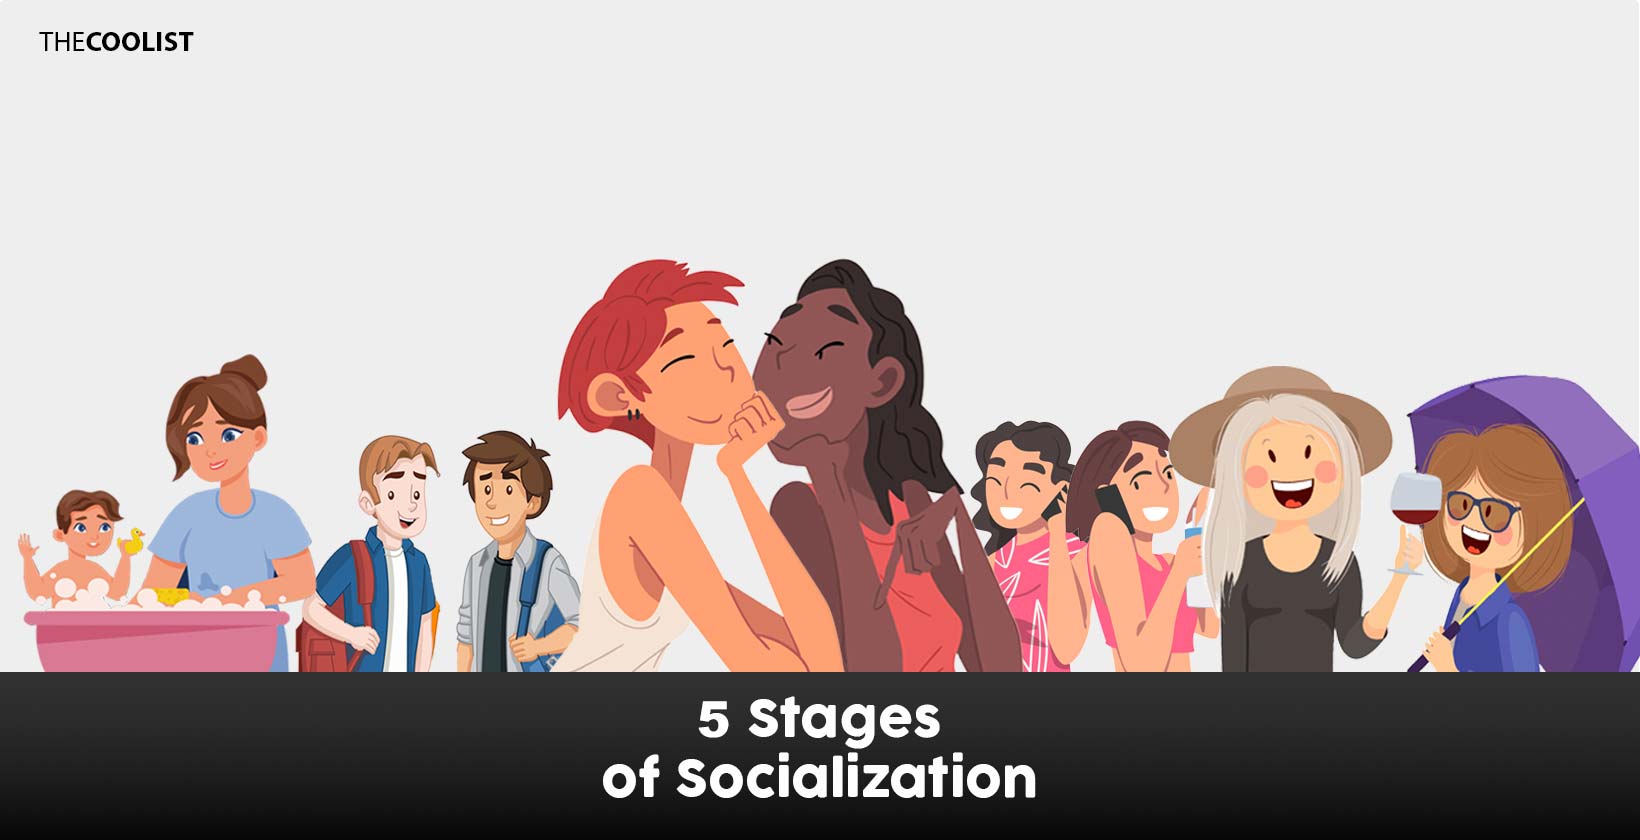 what is the first agent of socialization